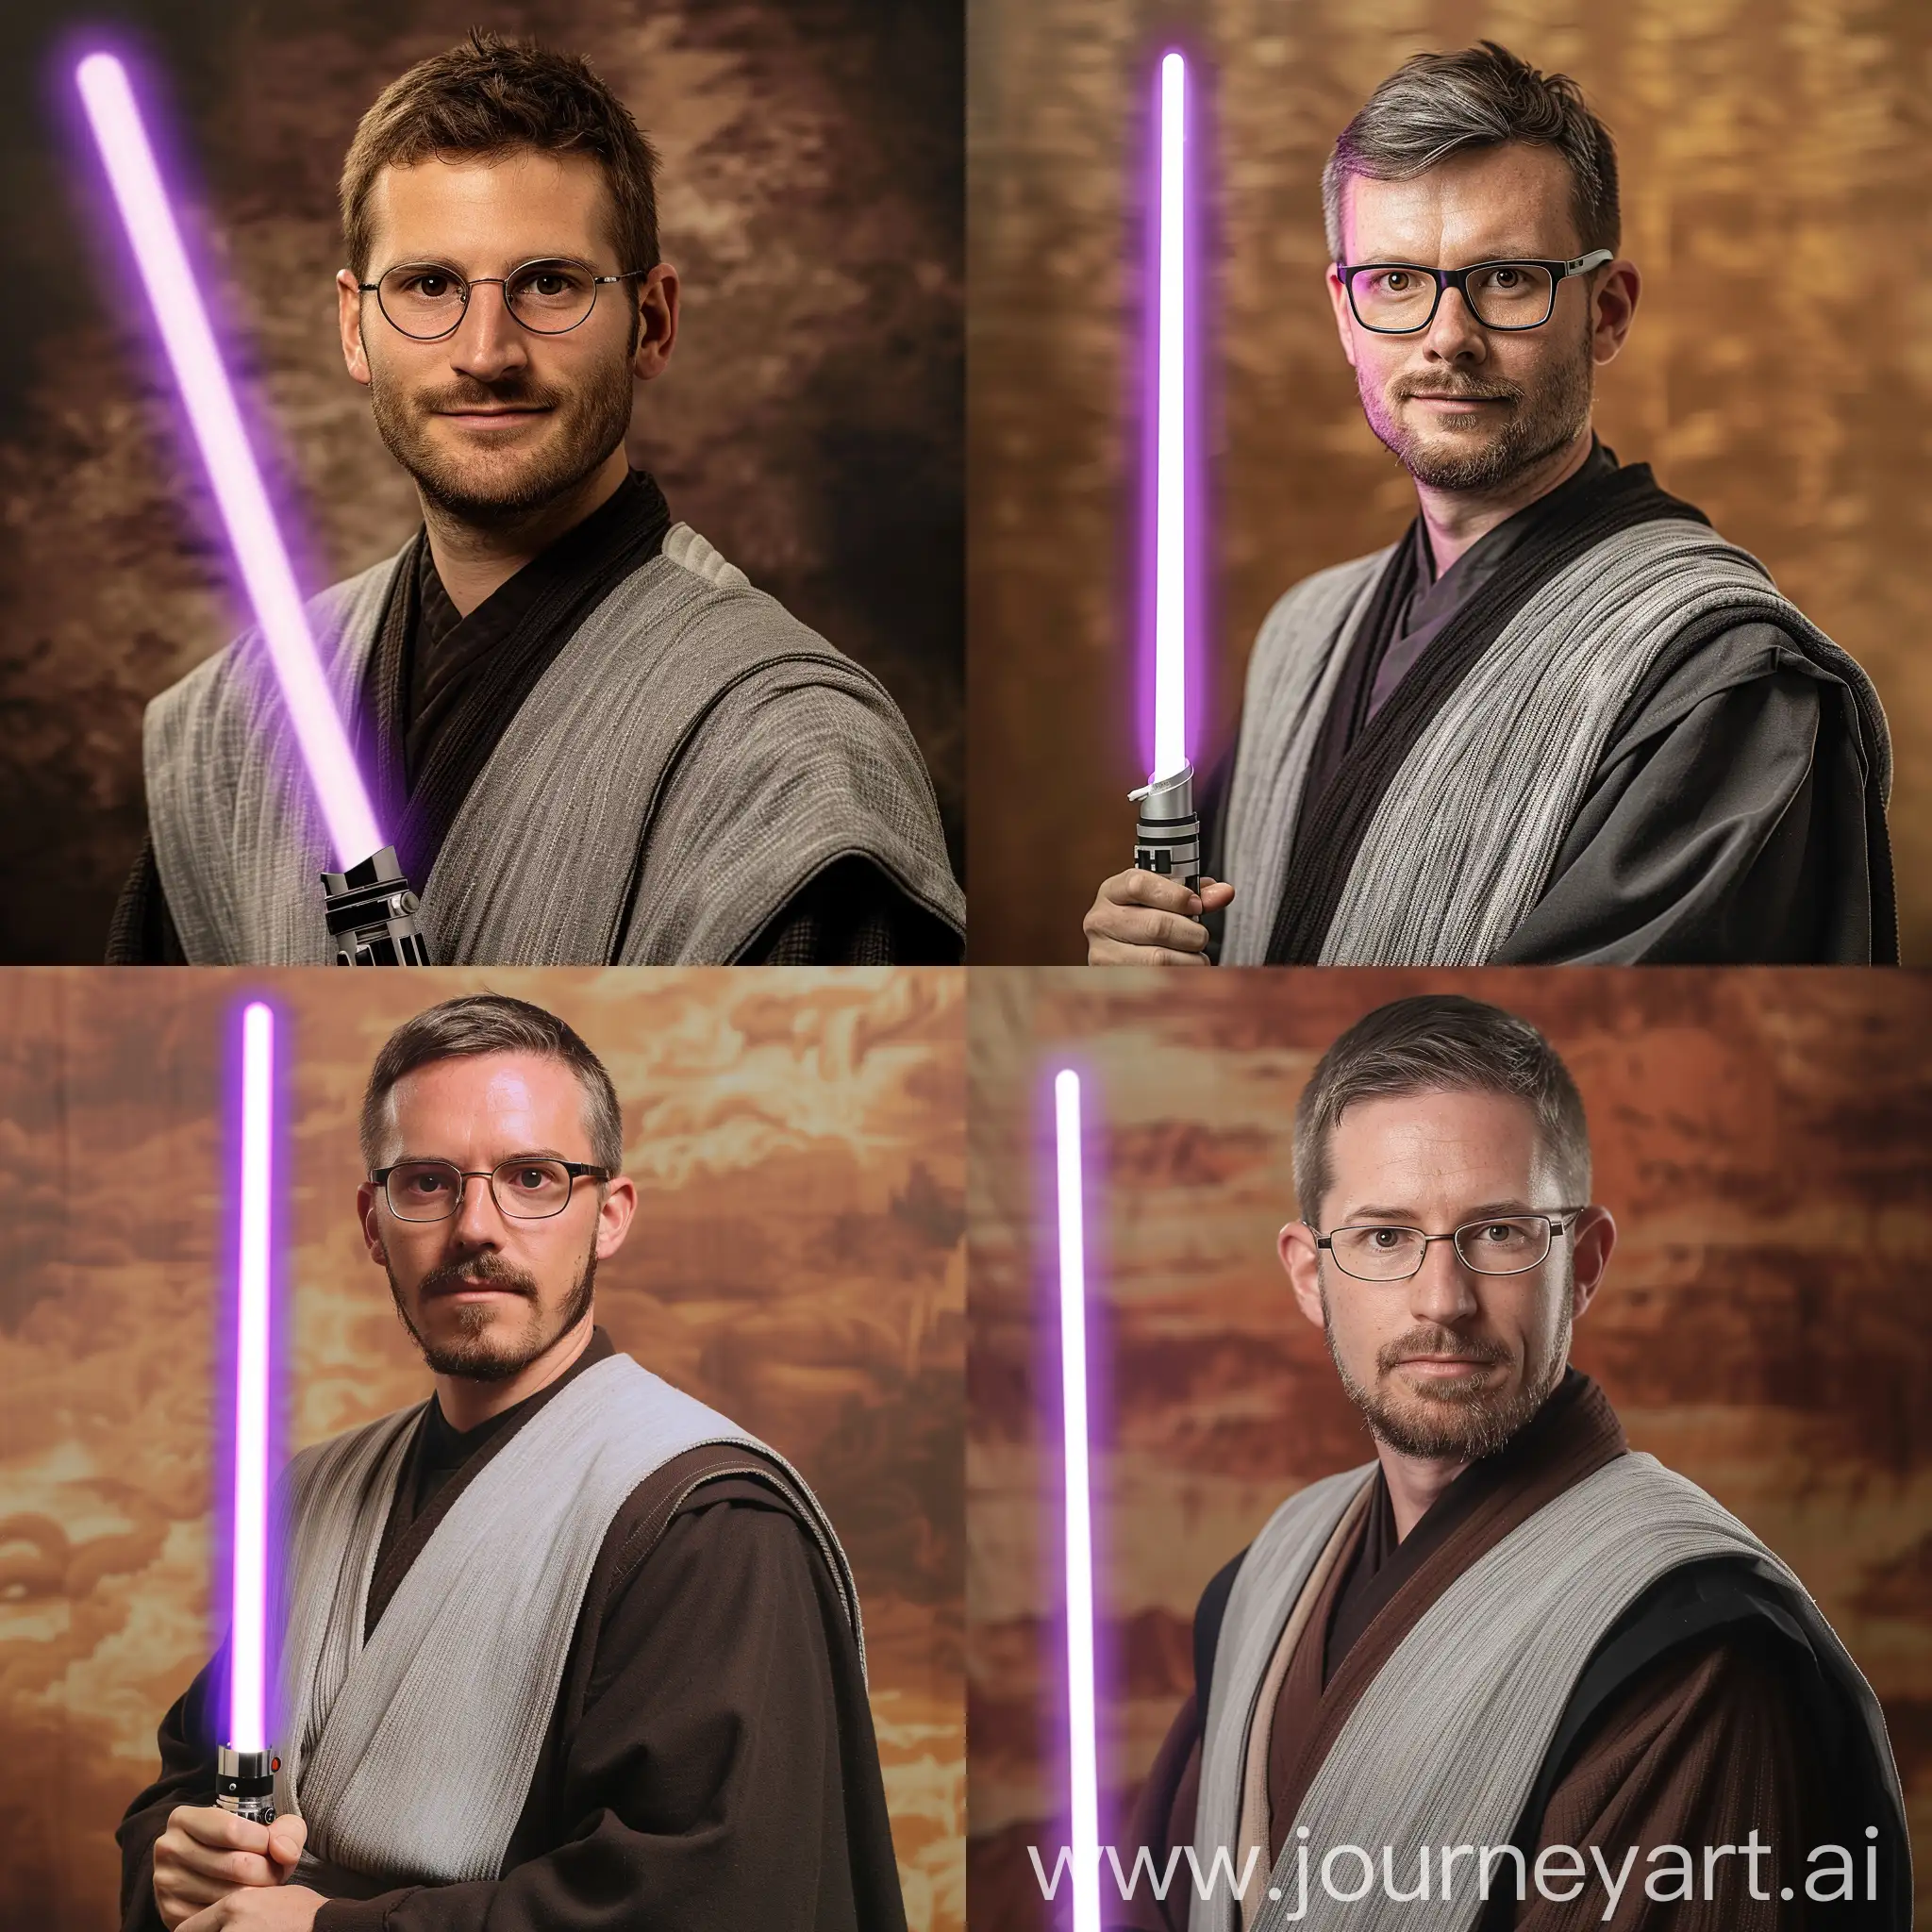 A 5’9 Caucasian male with rimless glasses, short brown hair and brown eyes, and a short well trimmed brown beard with hints of grey, dressed as a Jedi with grey and black robes and a purple bladed lightsaber in his left hand